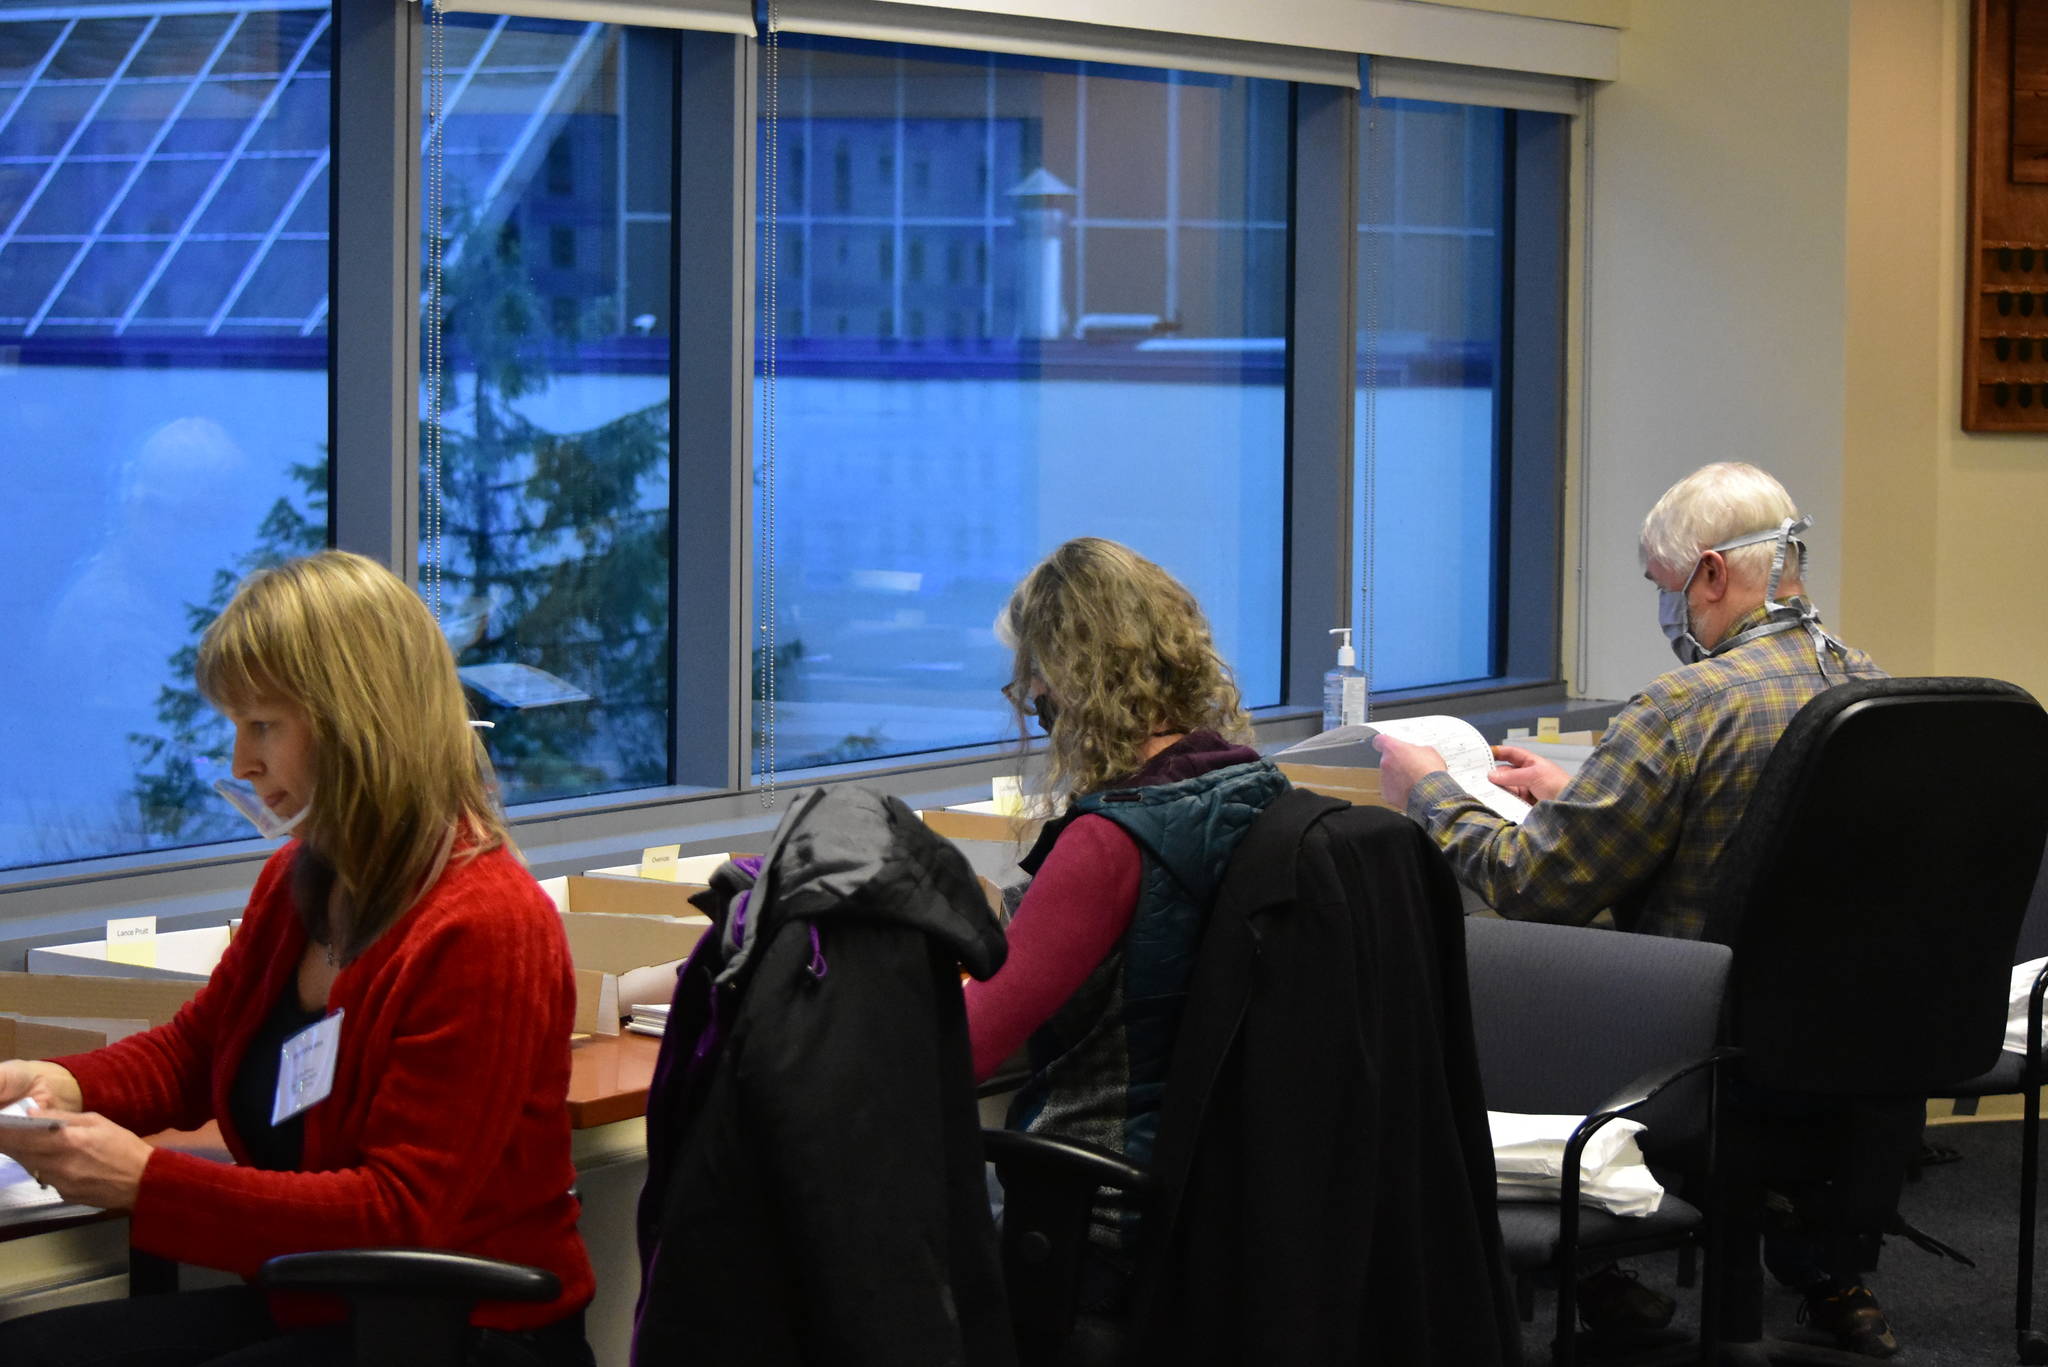 Members of the State Review Board hand count ballots from Anchorage's House District 27 on Friday, Dec. 4,  2020. The race was called with a margin of only 13 votes, and a recount was requested shortly after results were certified. (Peter Segall / Juneau Empire)